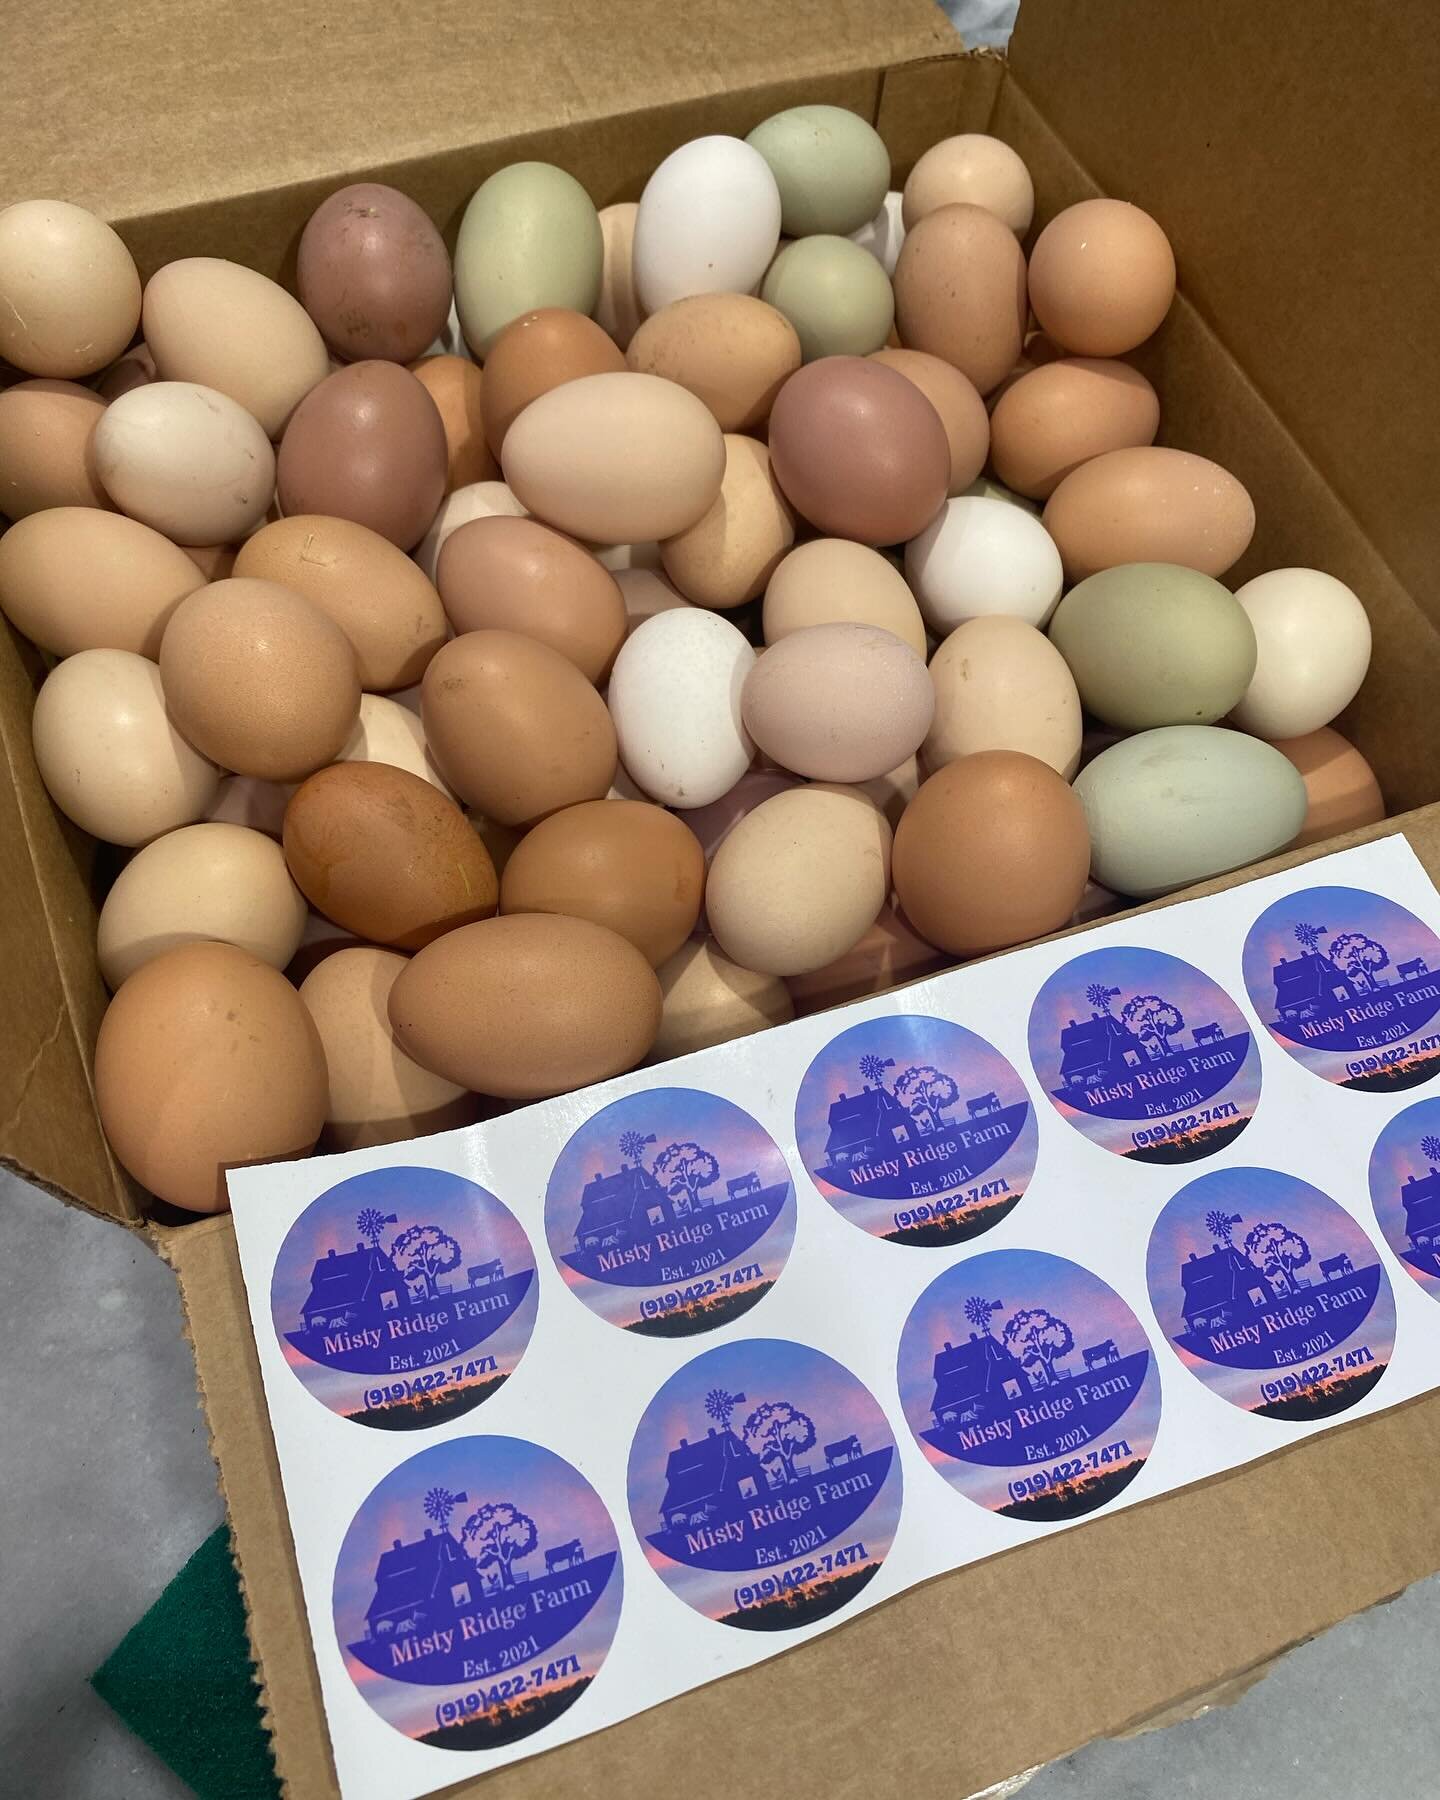 7 doz free range eggs headed out. The girls are doing good for this time of year.